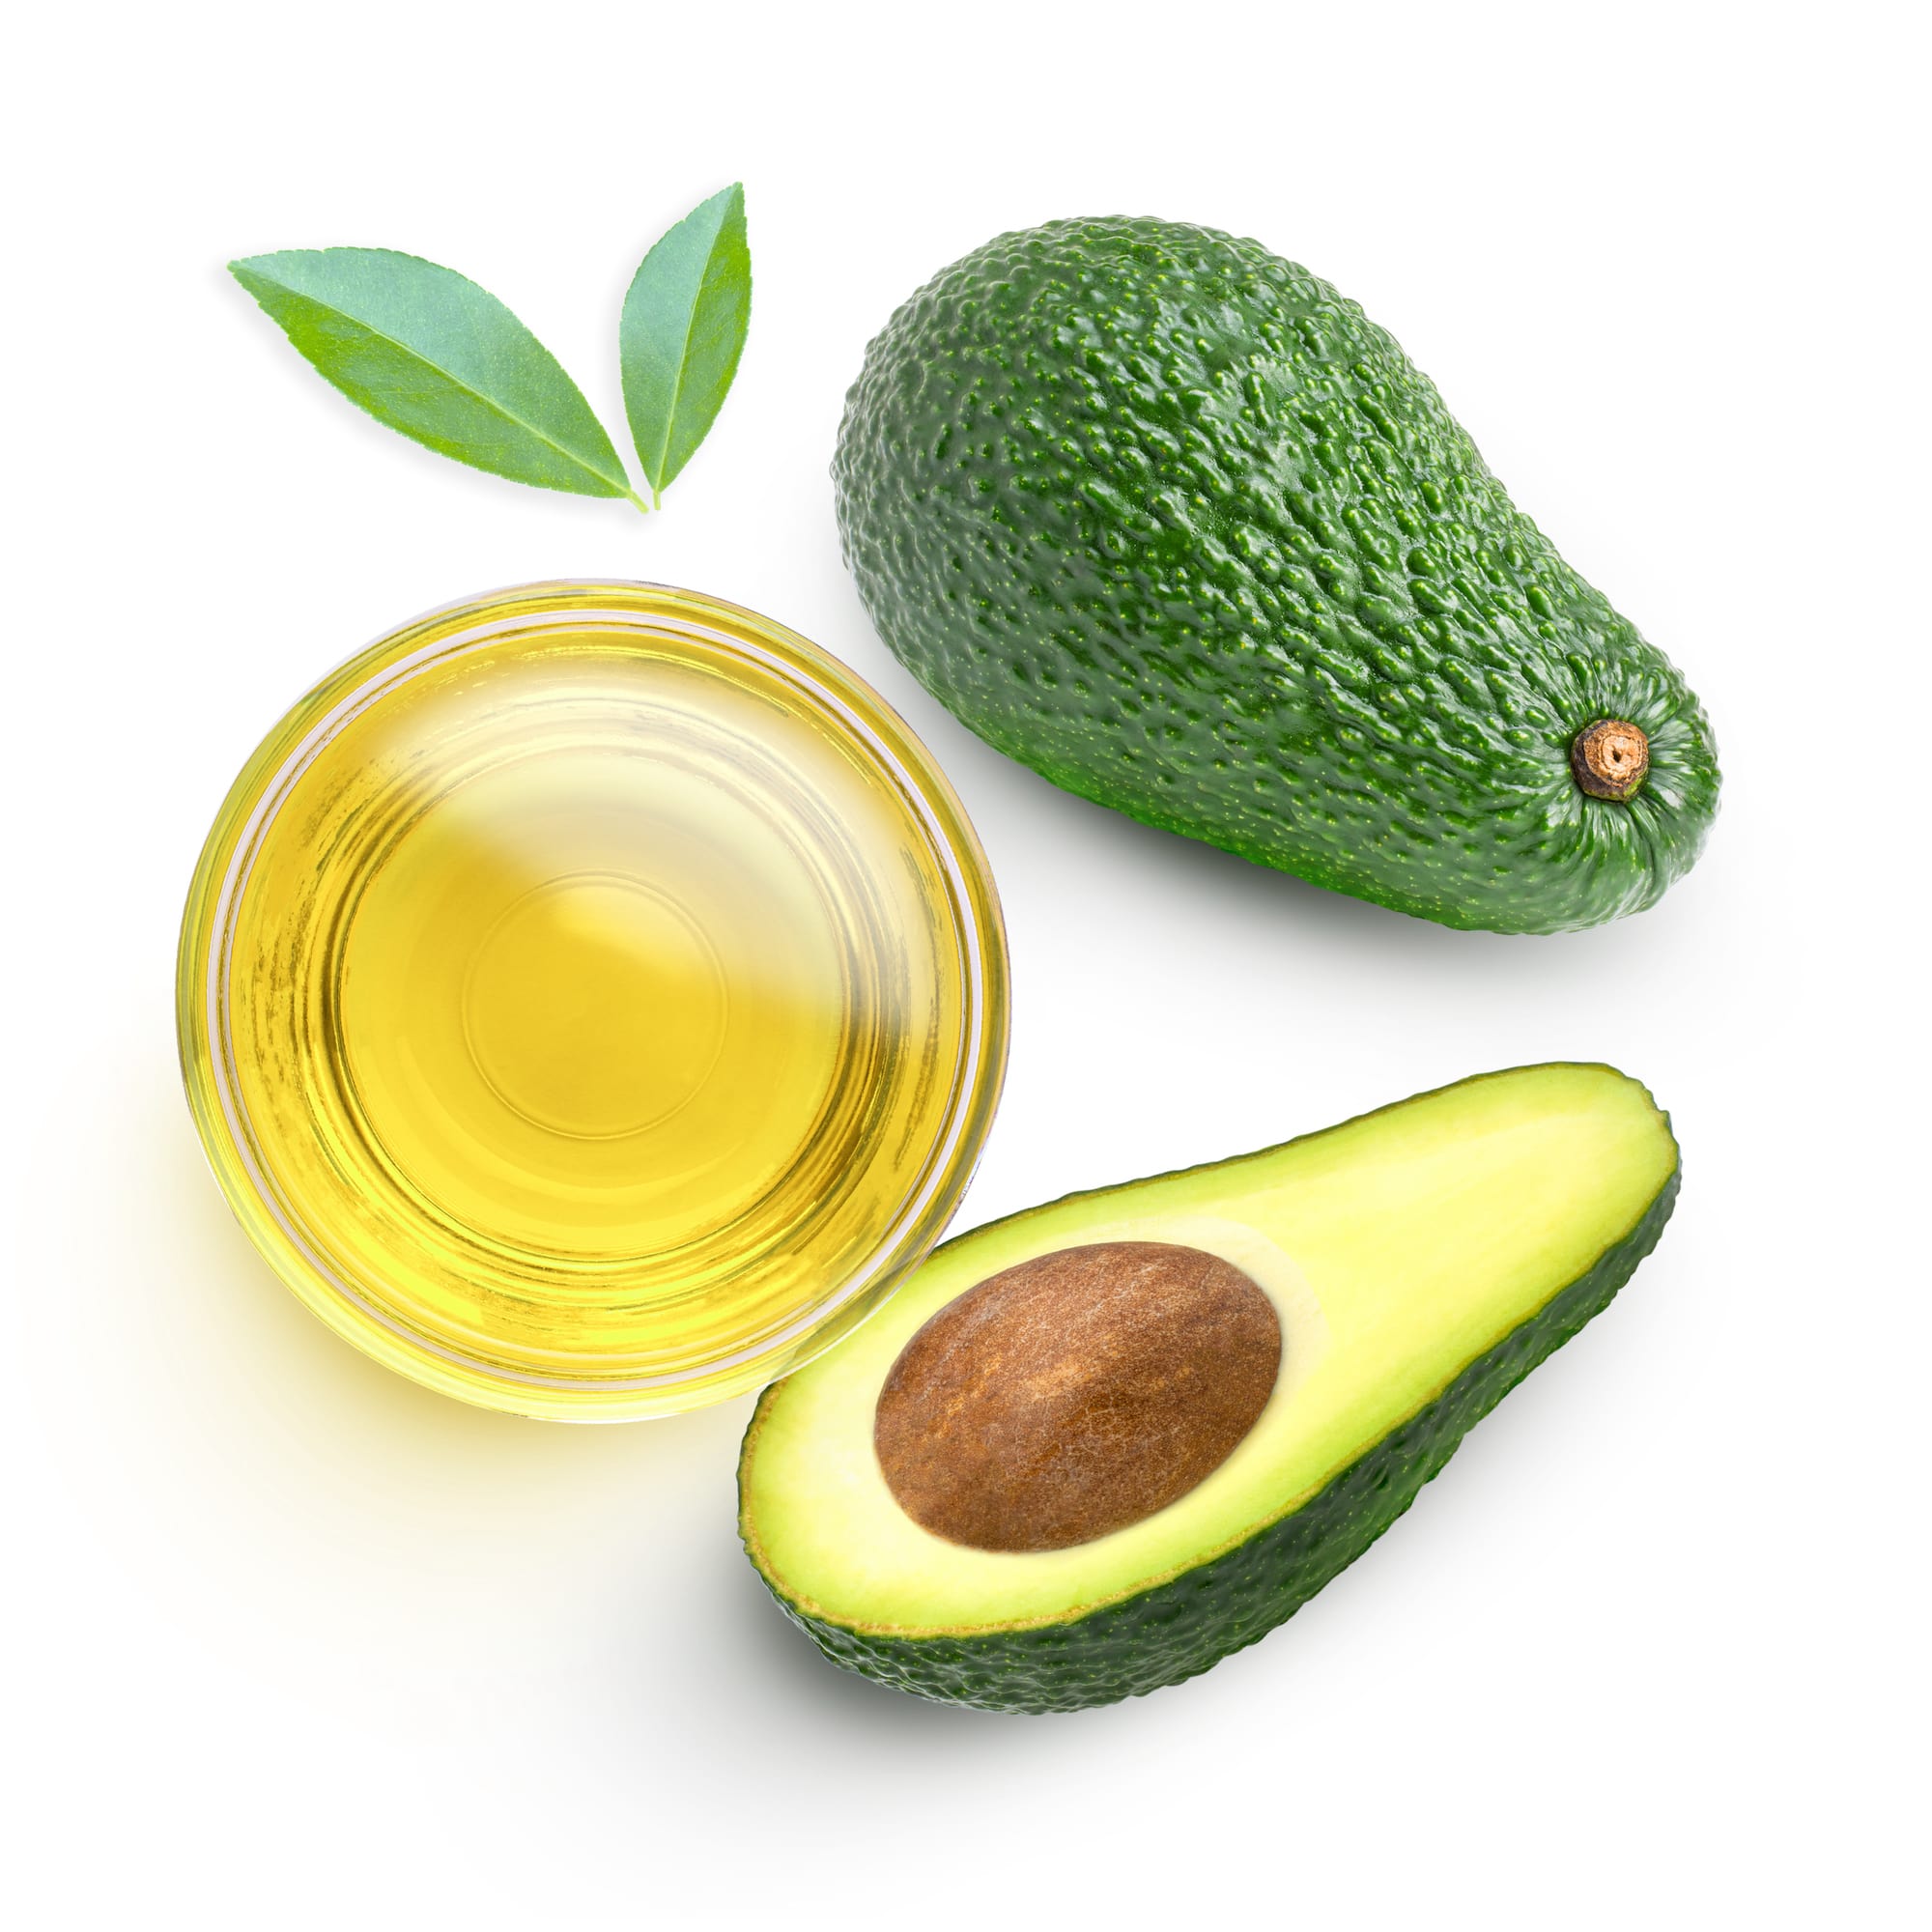 Good Fats From Plant-Based Oils